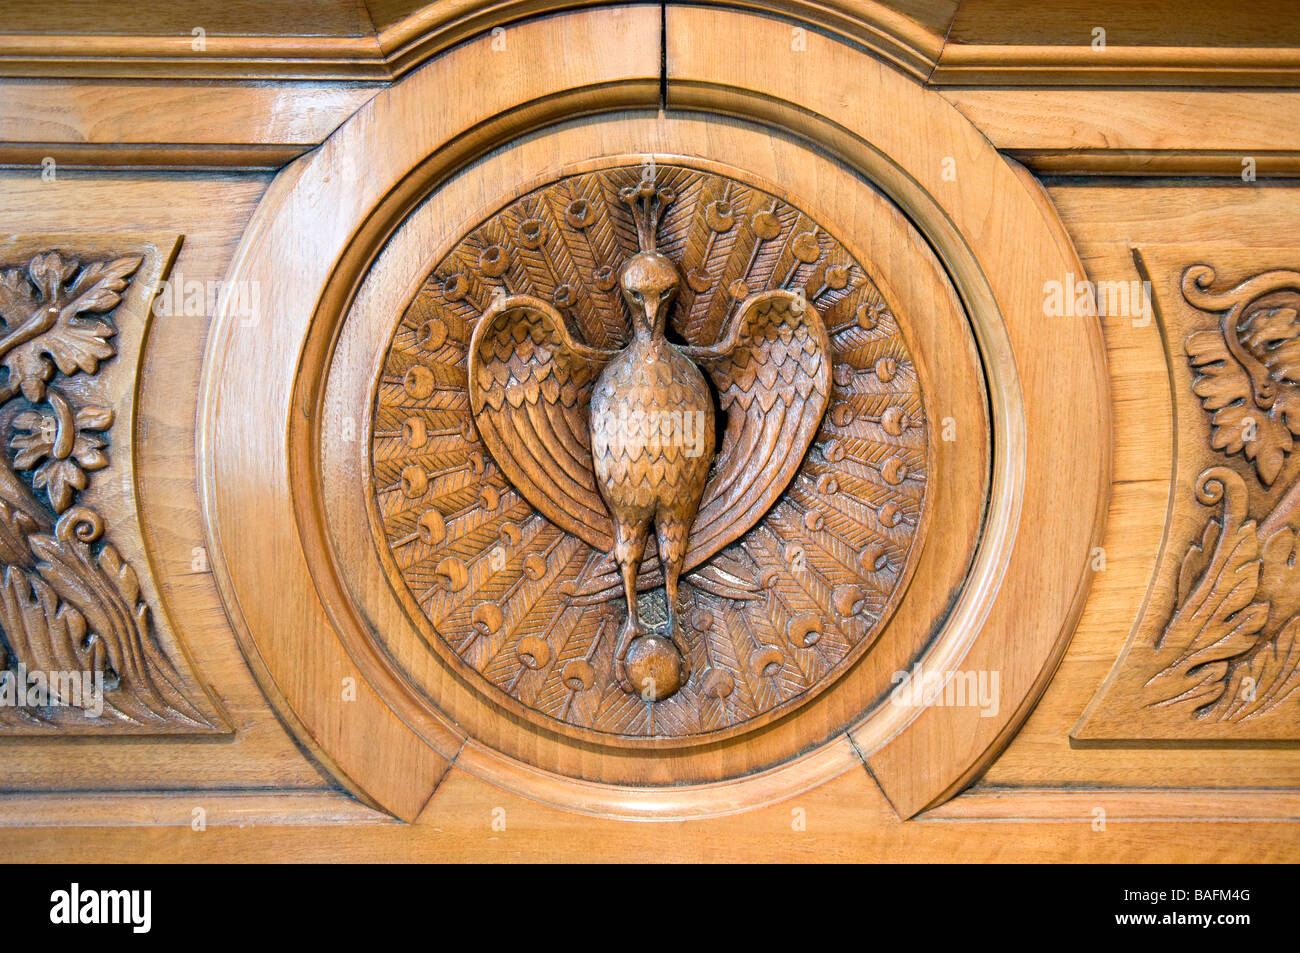 Wooden carving of Liverpool Liver Bird Crest Stock Photo